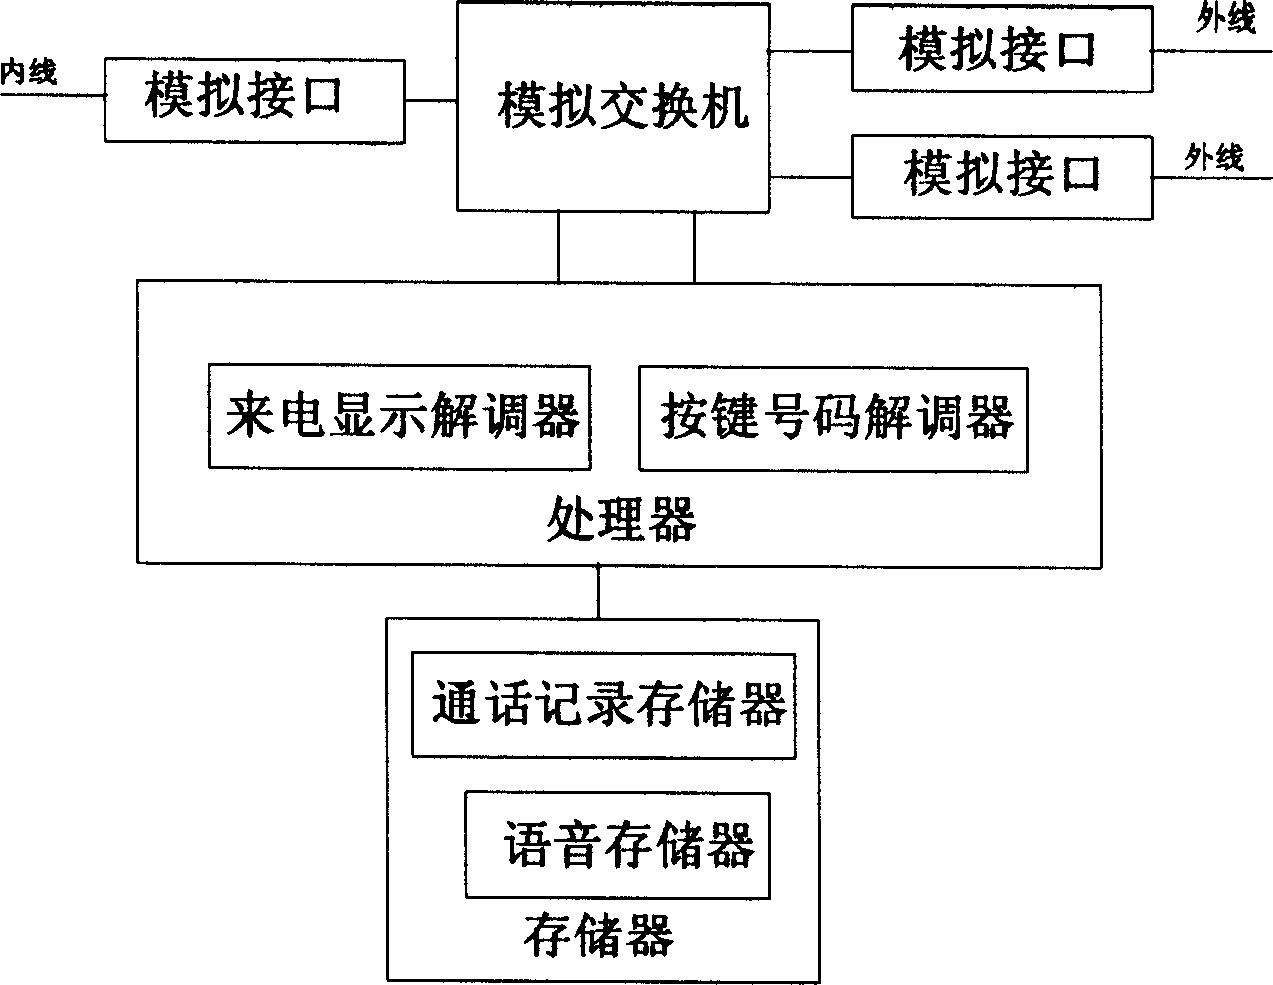 Method for instantly getting extension telephone by recalling group telephone exchange